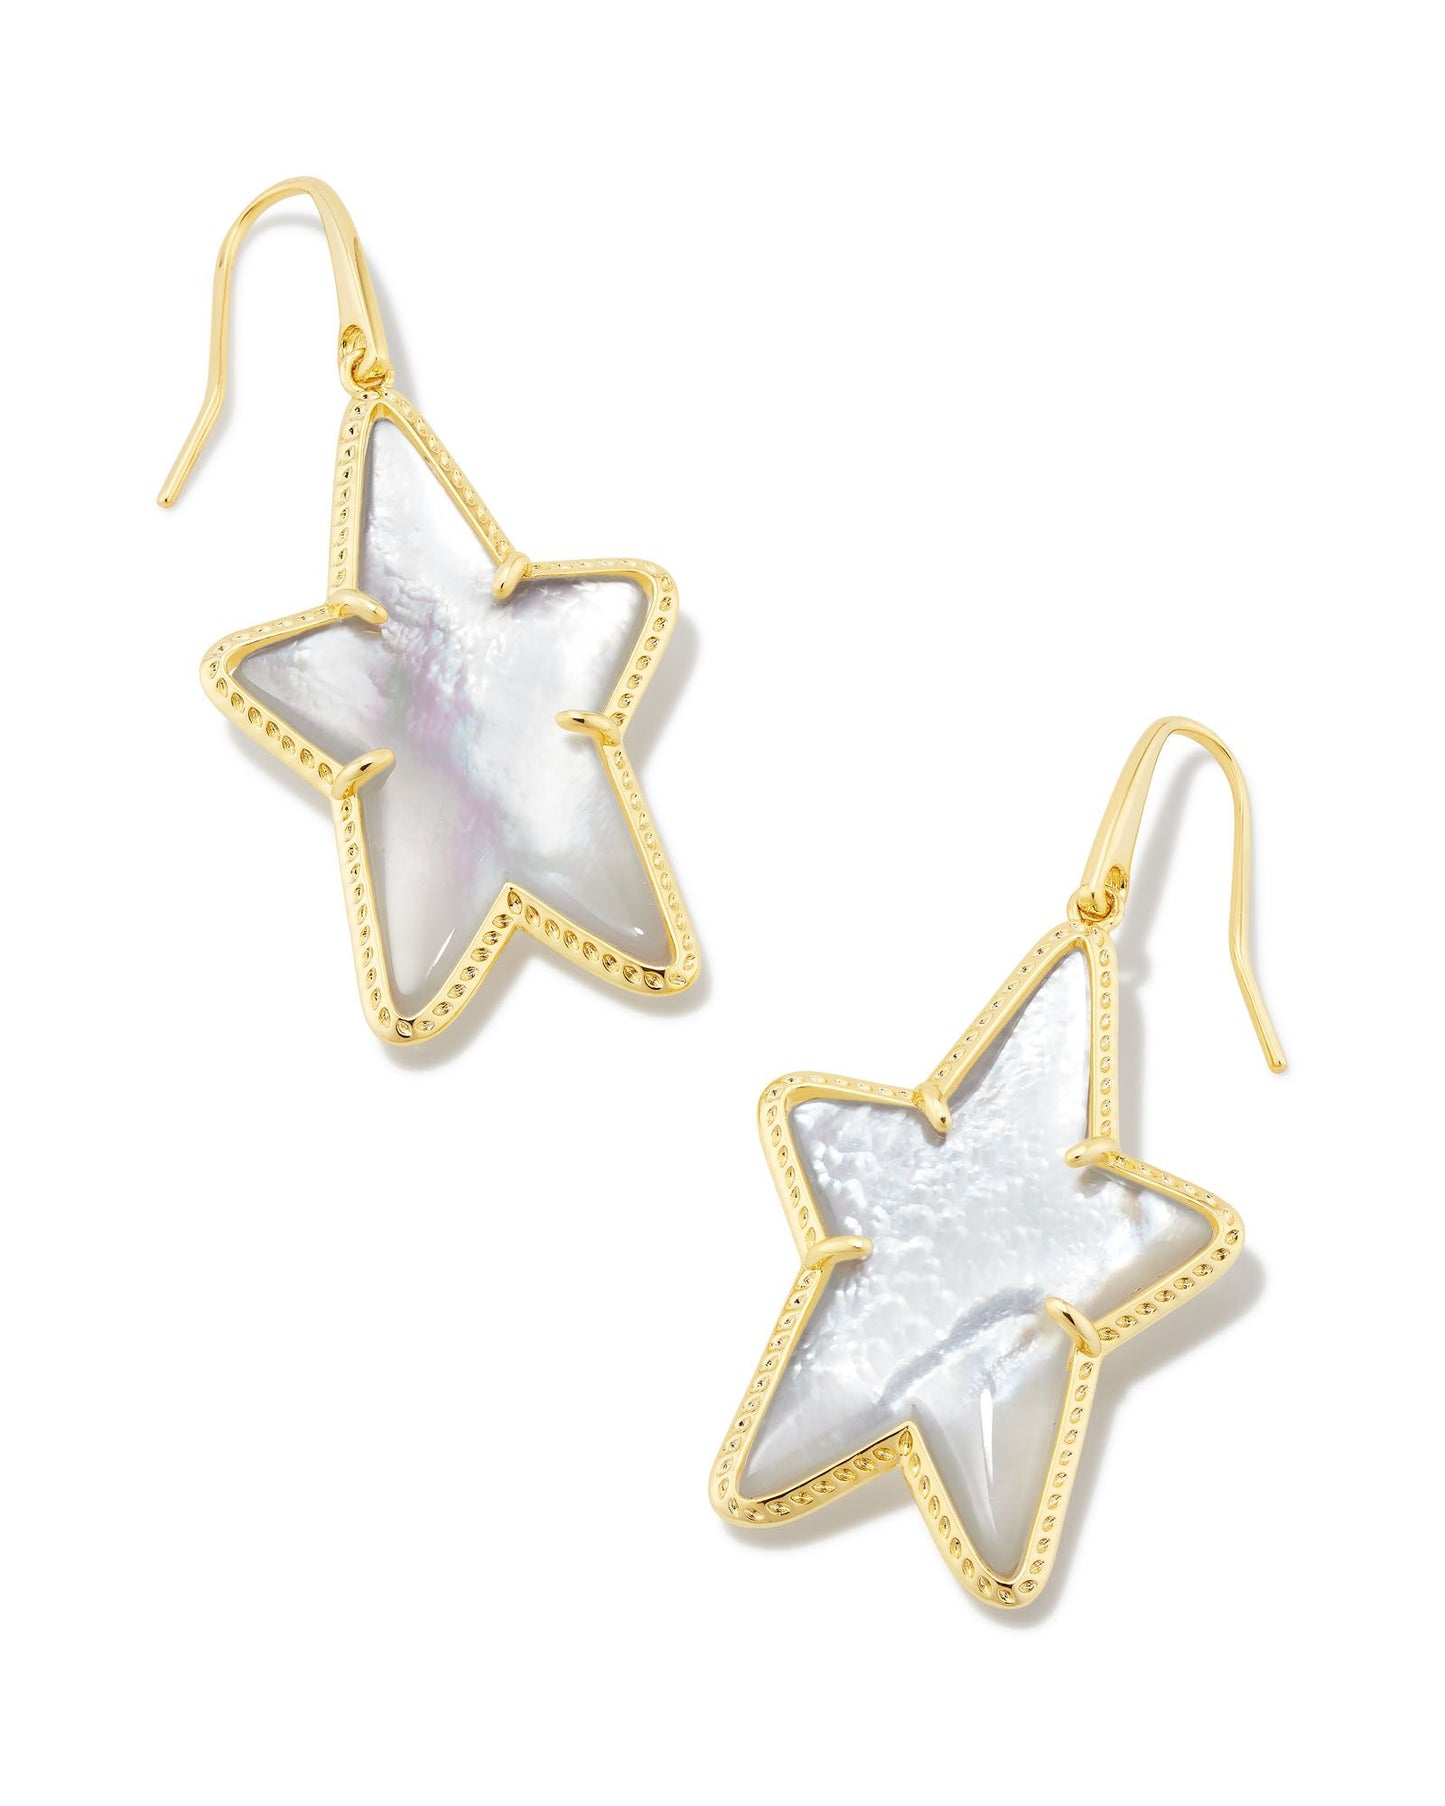 Ada Gold Star Earrings in Ivory Mother of Pearl